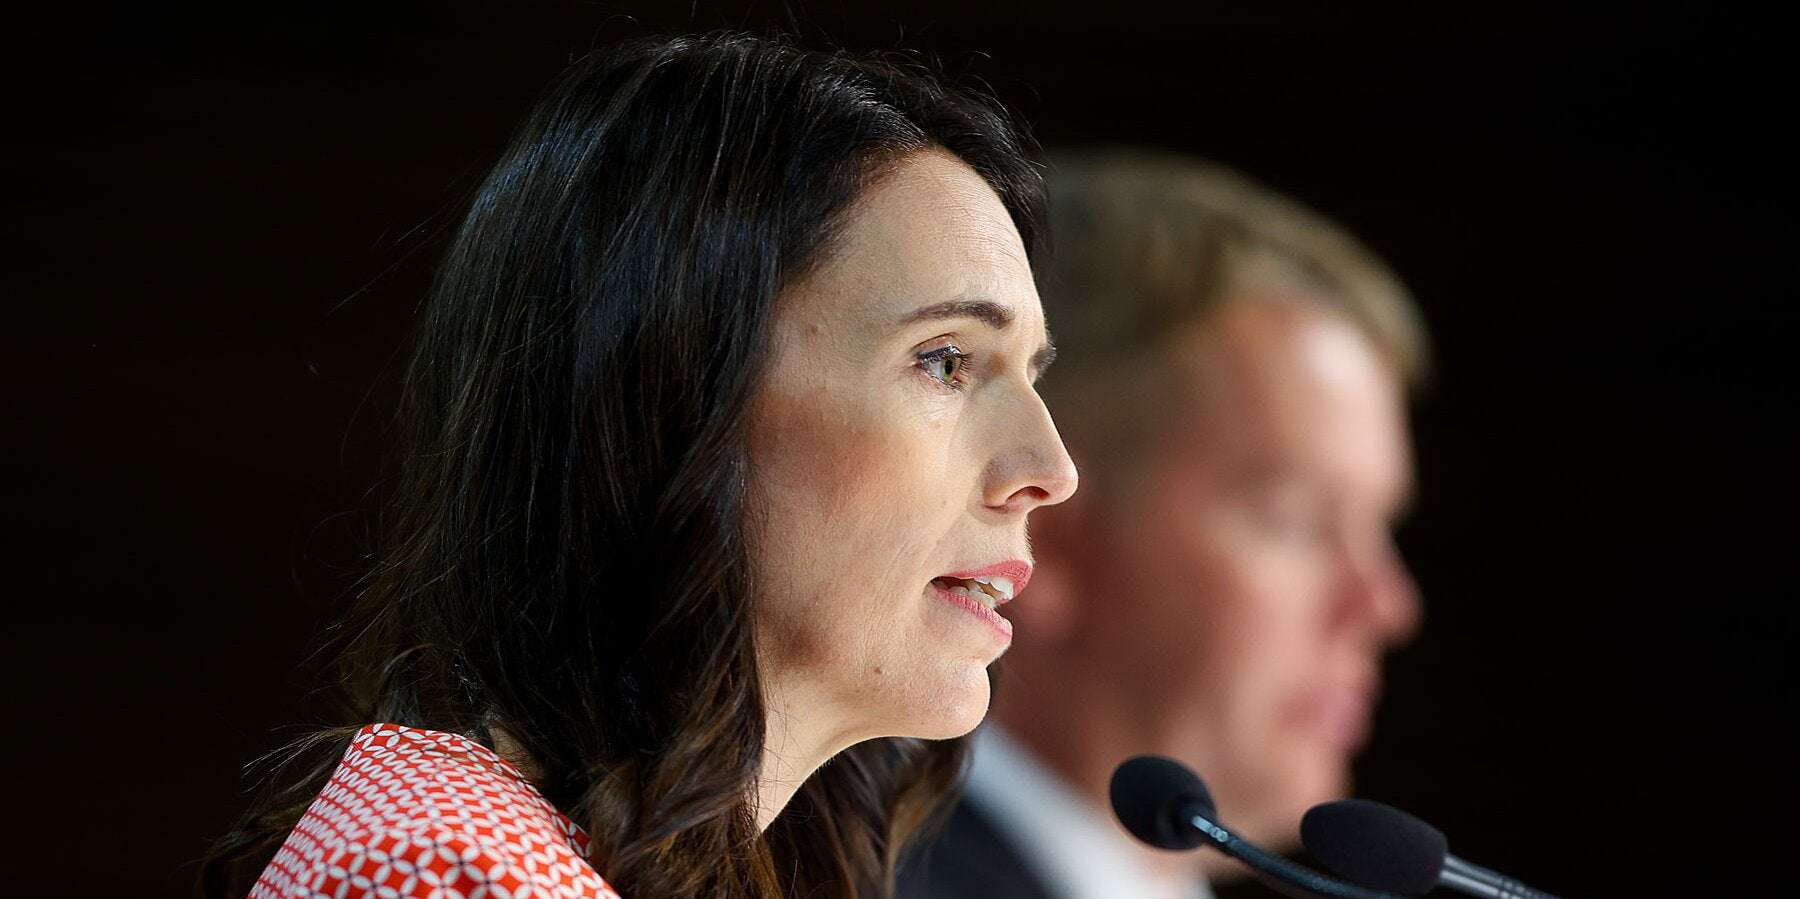 image for New Zealand Prime Minister Says Borders Will Remain Closed to Tourists Until Citizens Are Vaccinated